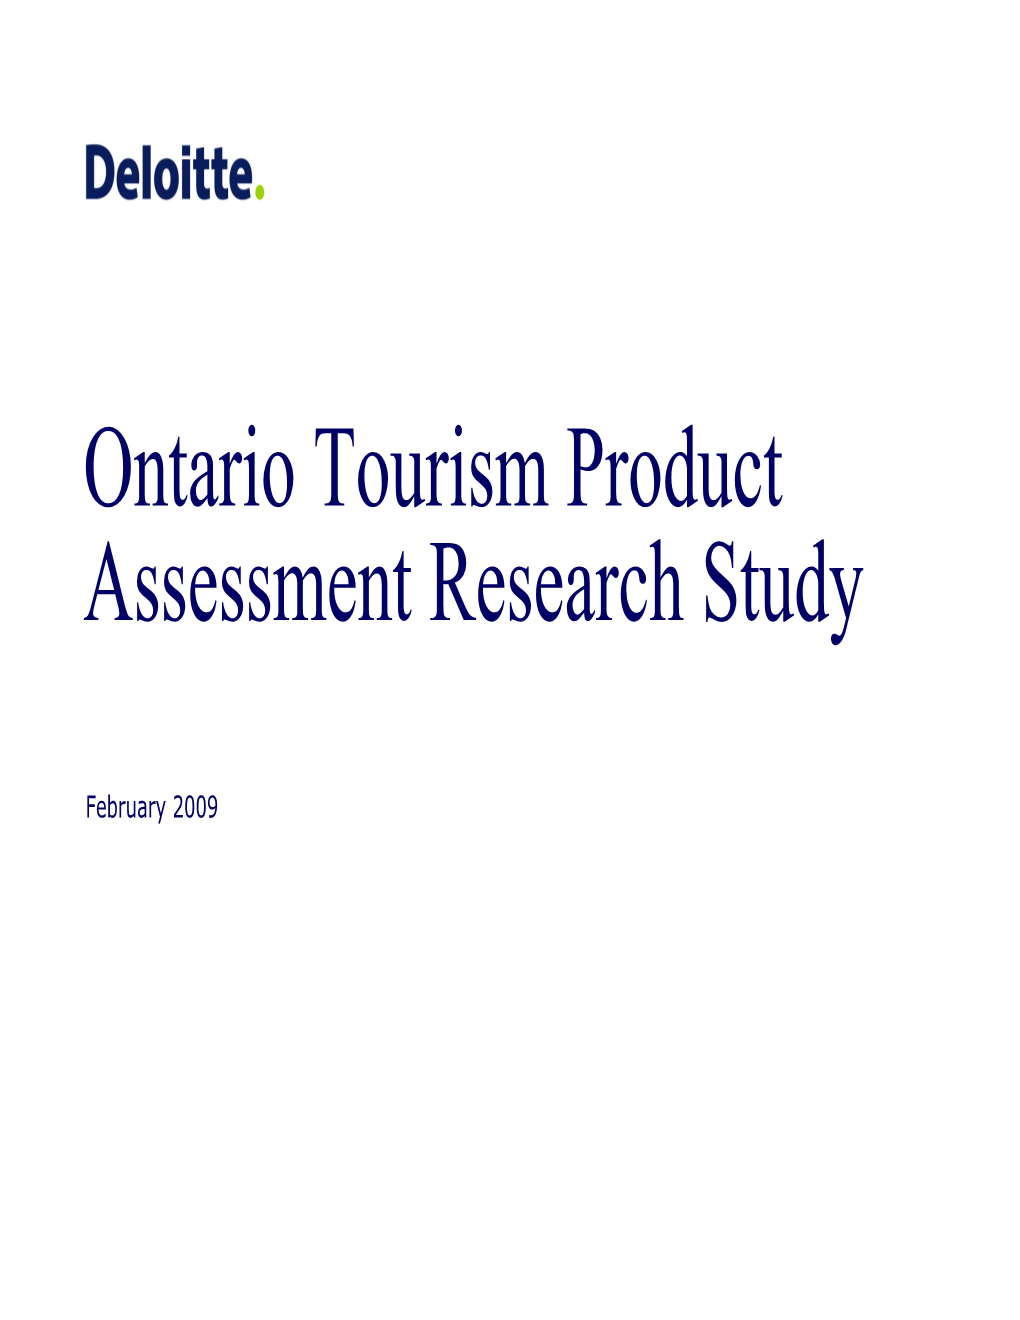 Ontario Tourism Product Assessment Research Study